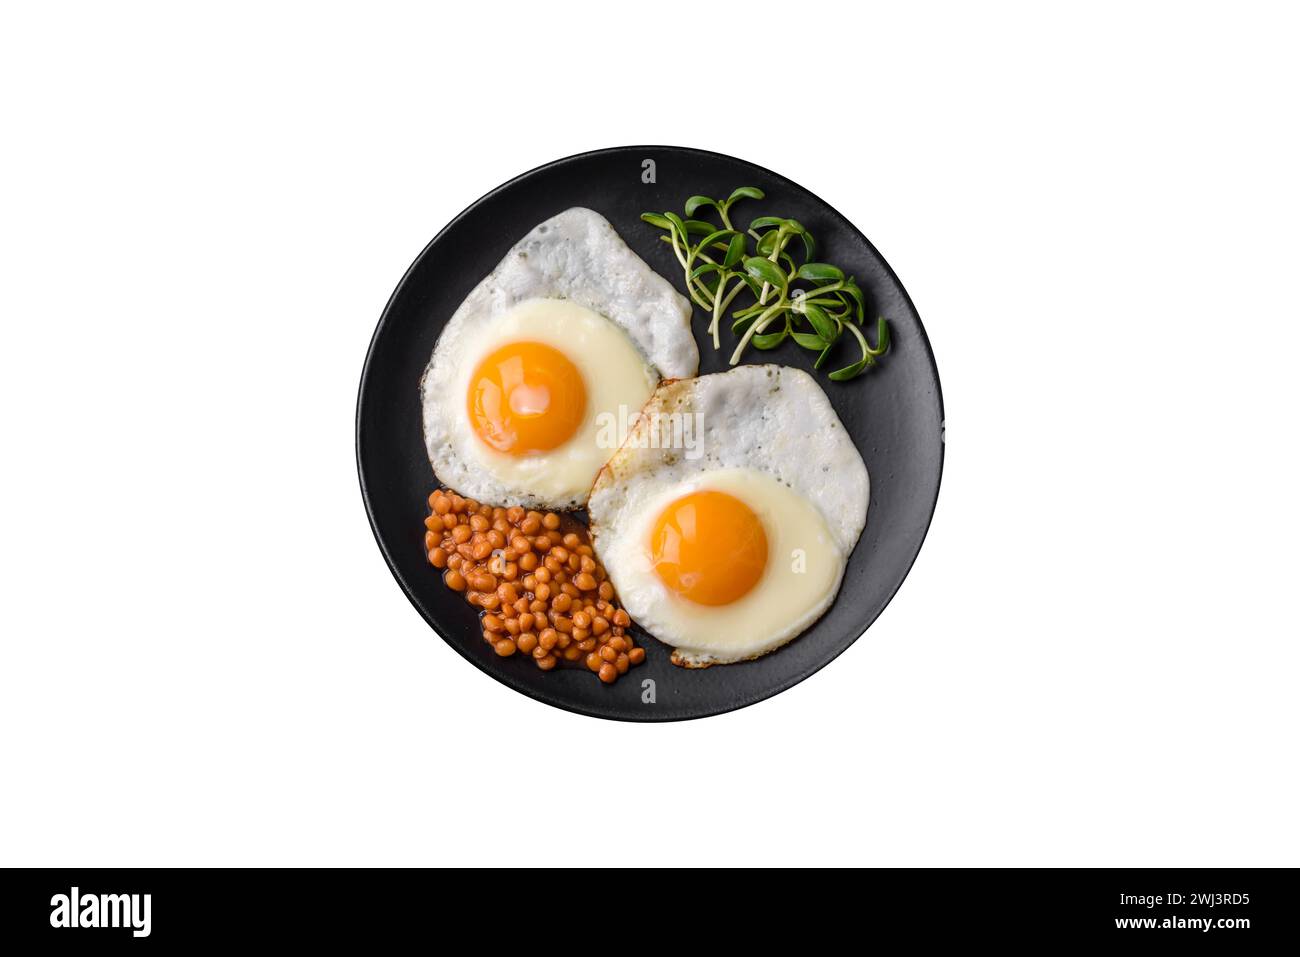 Delicious hearty breakfast consisting of two fried eggs, canned lentils and microgreens Stock Photo